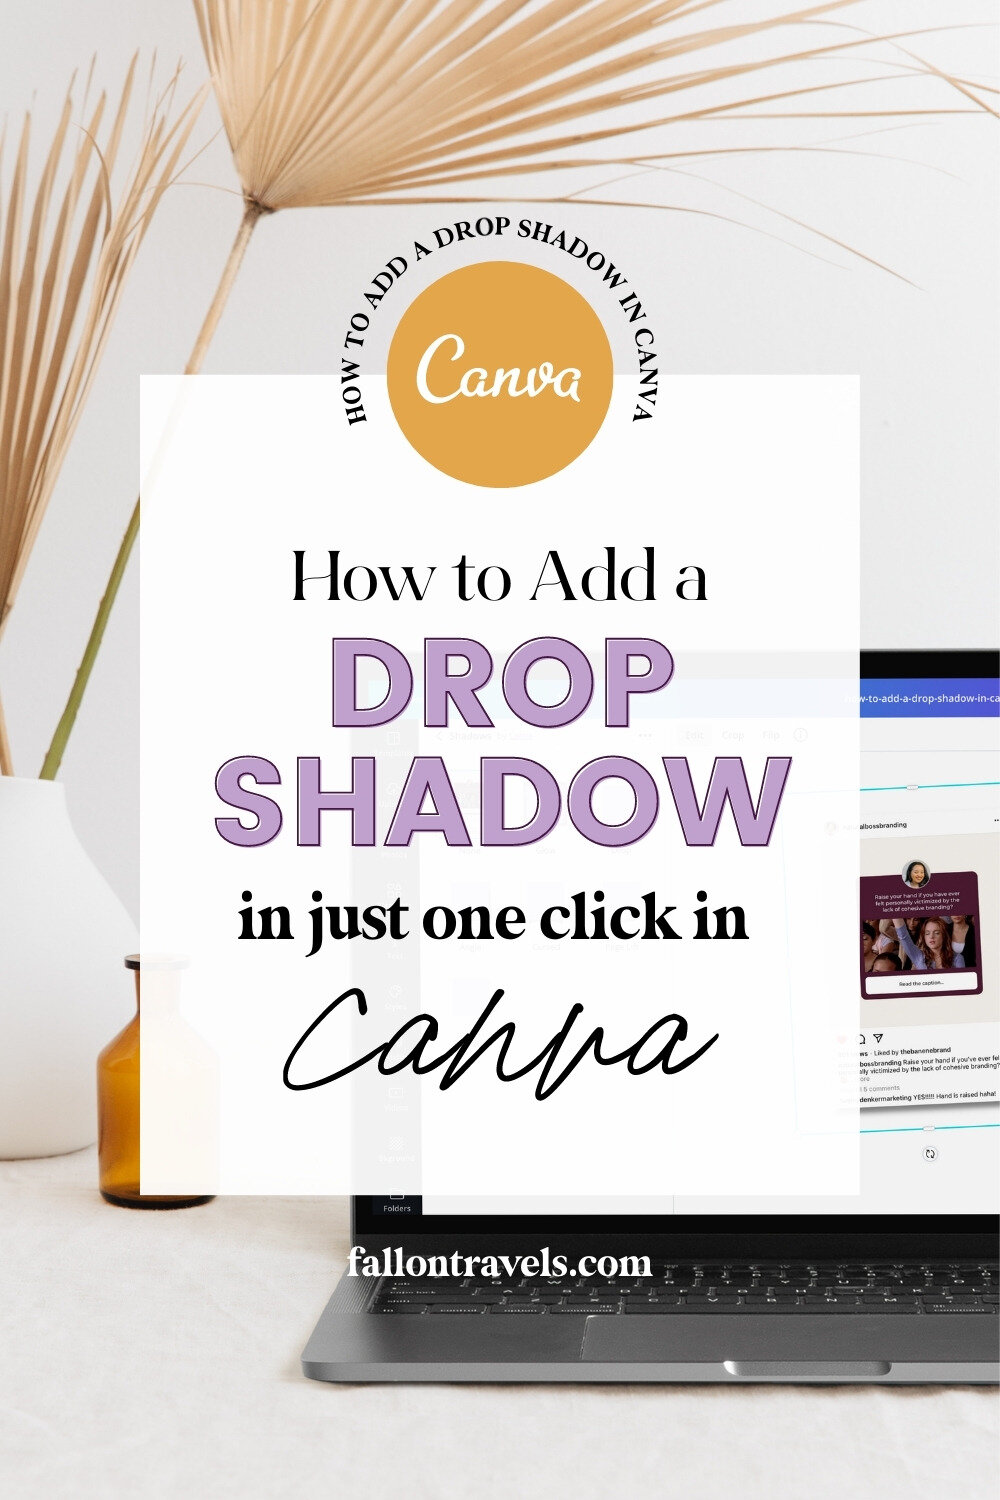 How to Add a Drop Shadow in Canva